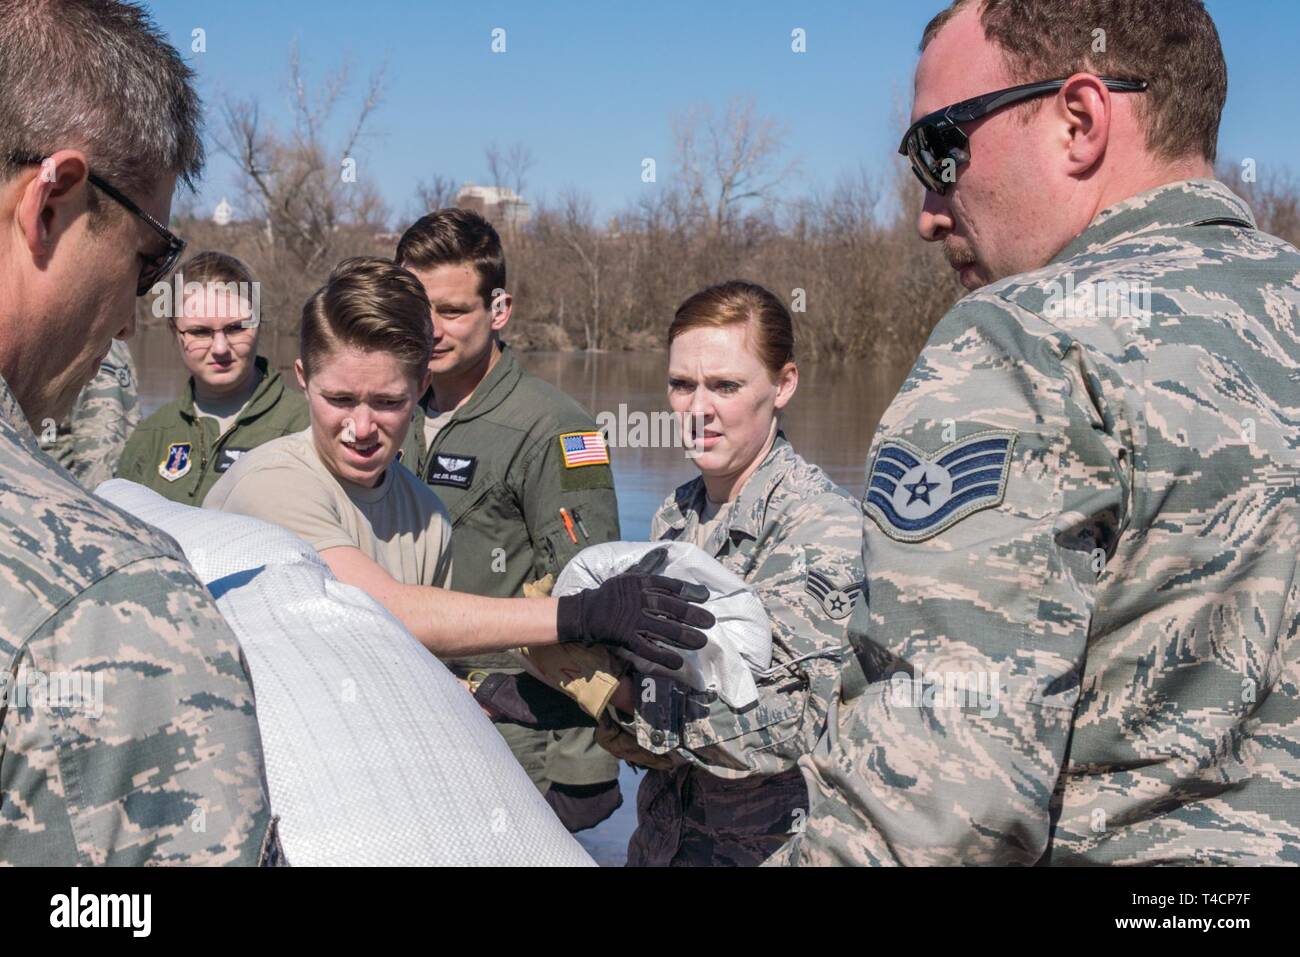 U.S. Airmen Staff Sgt. Paige Howard, left, and Senior Airman Kacie Bigham both assigned to the 139th Force Support Squadron, Missouri Air National Guard, help lay sandbags along the levee that protects Rosecrans Memorial Airport and surrounding communities on March 22, 2019. An increase in water levels of surrounding rivers and waterways caused by record-setting snowfall over the winter in addition to a large drop in air pressure caused widespread flooding across the midwest. Stock Photo